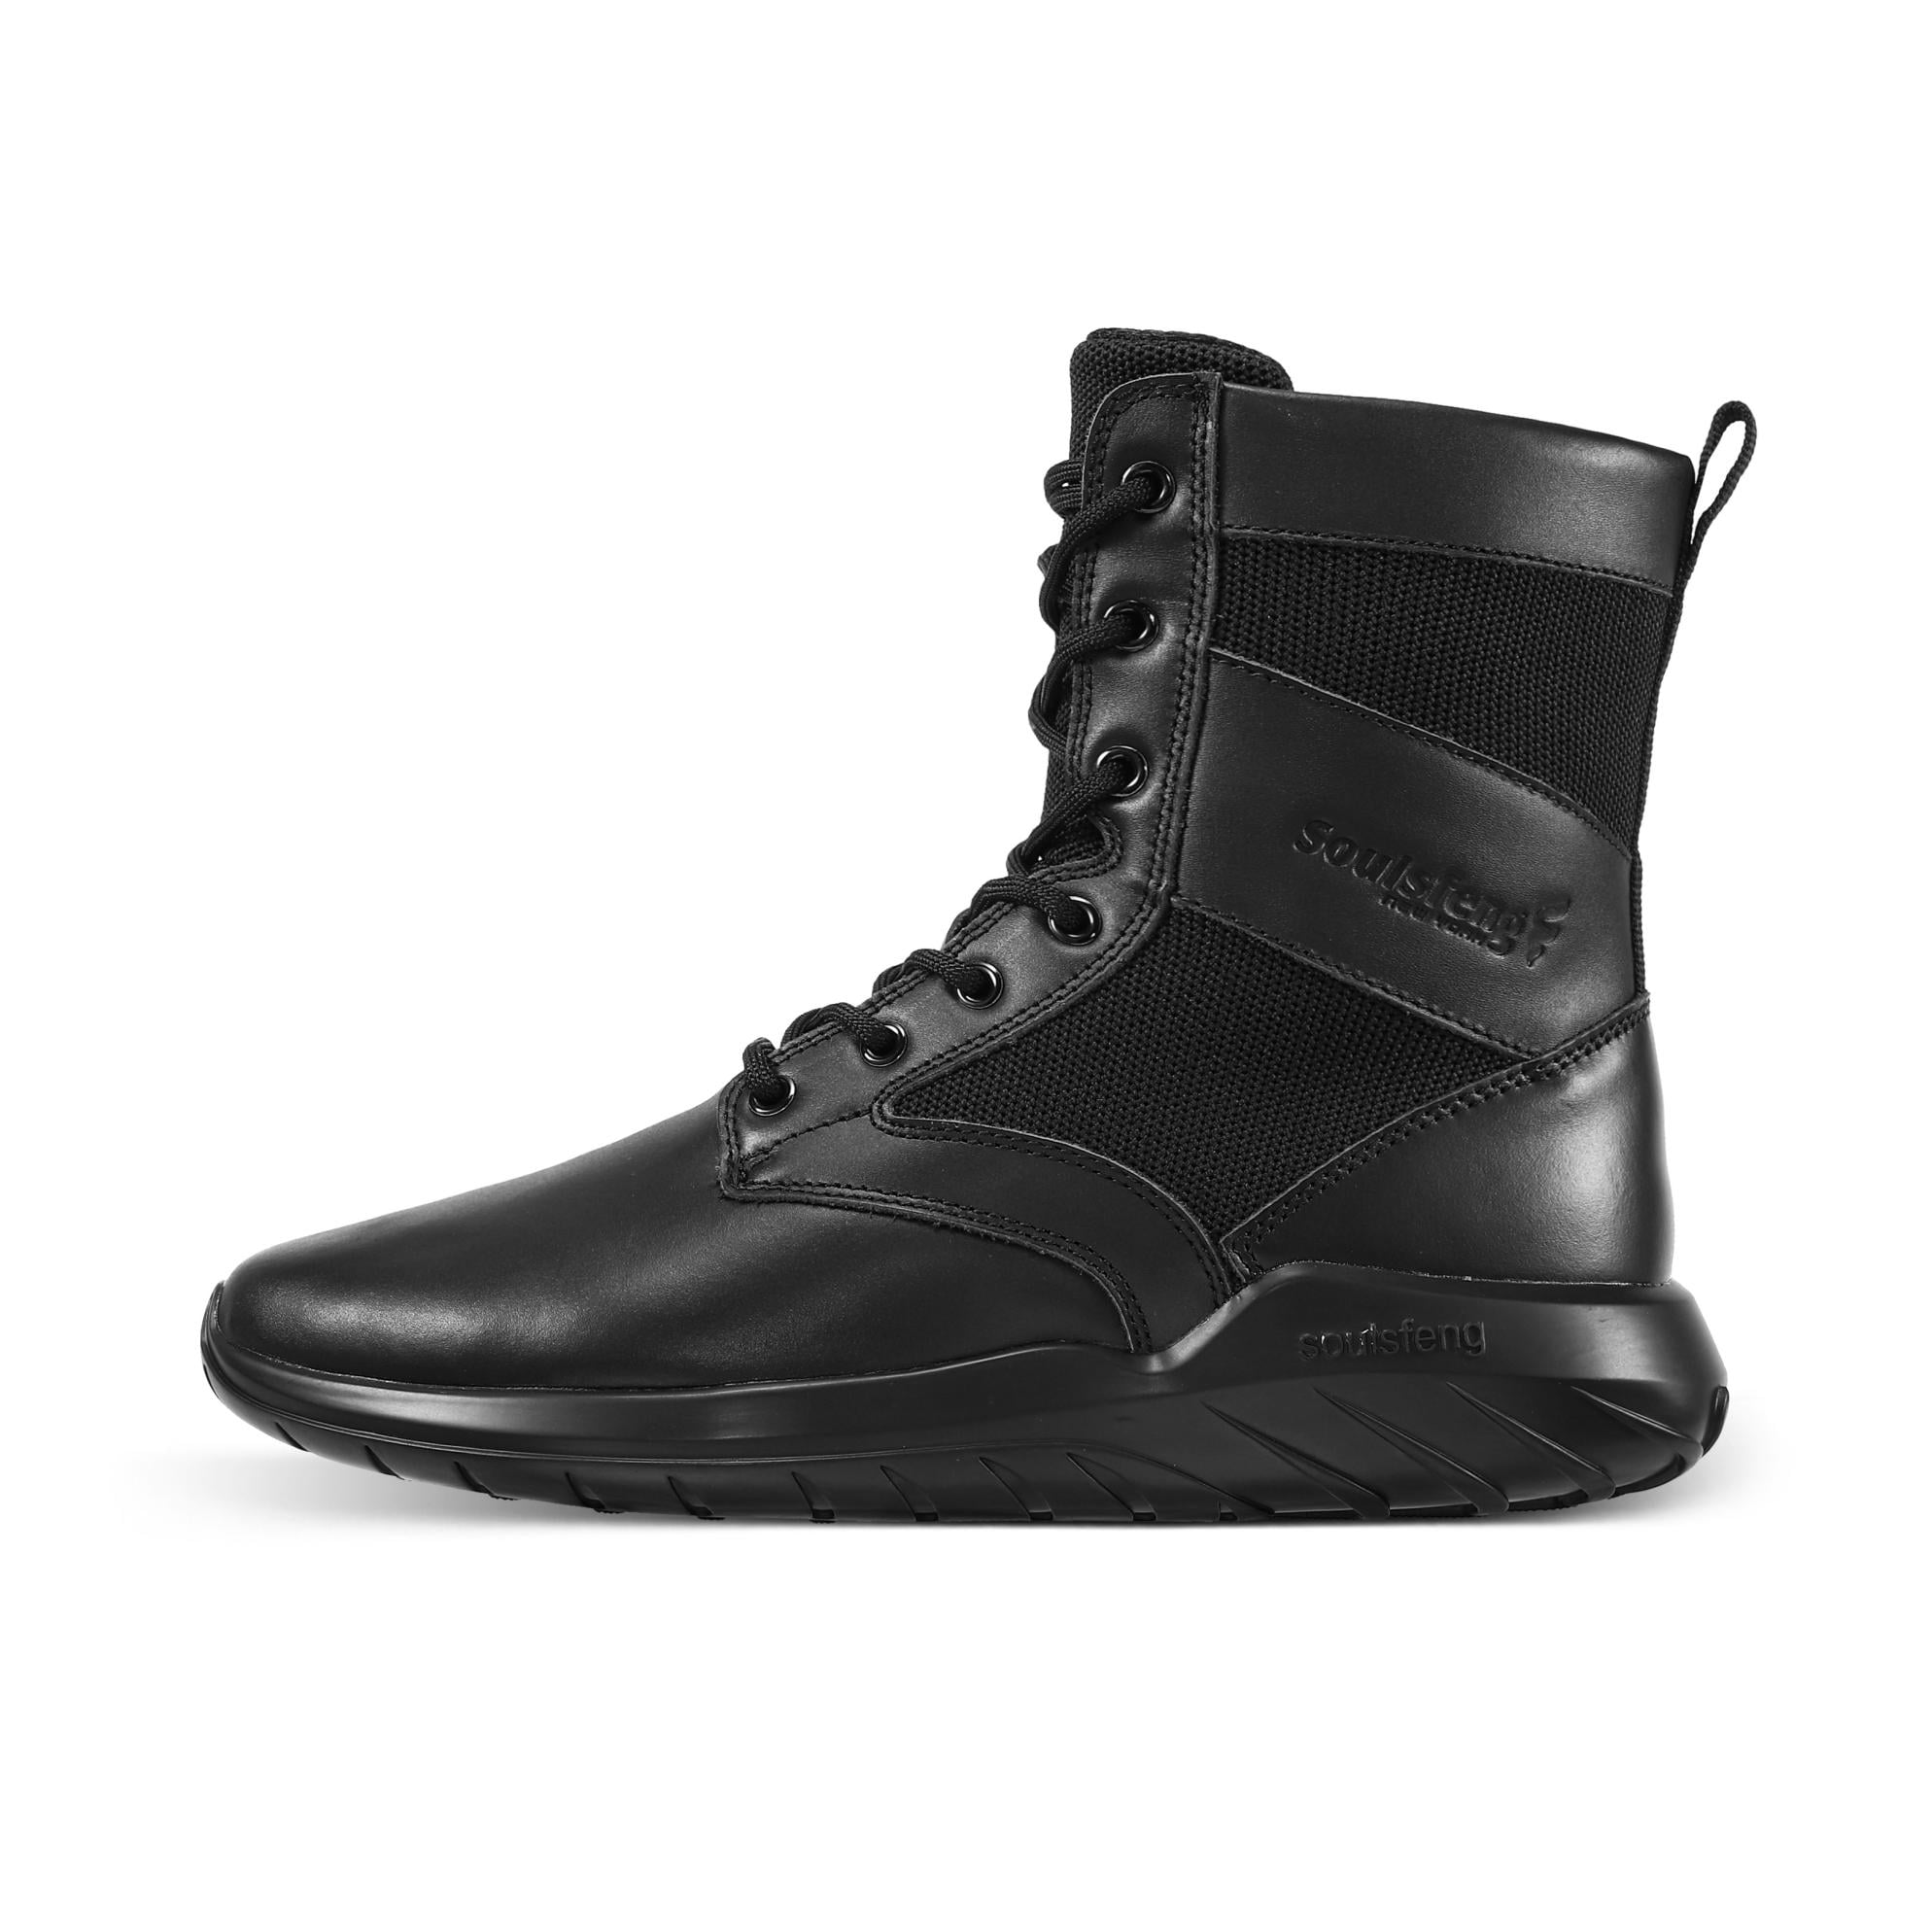 Soulsfeng Men's Tactical Boots Lightweight Breathable Military Combat ...